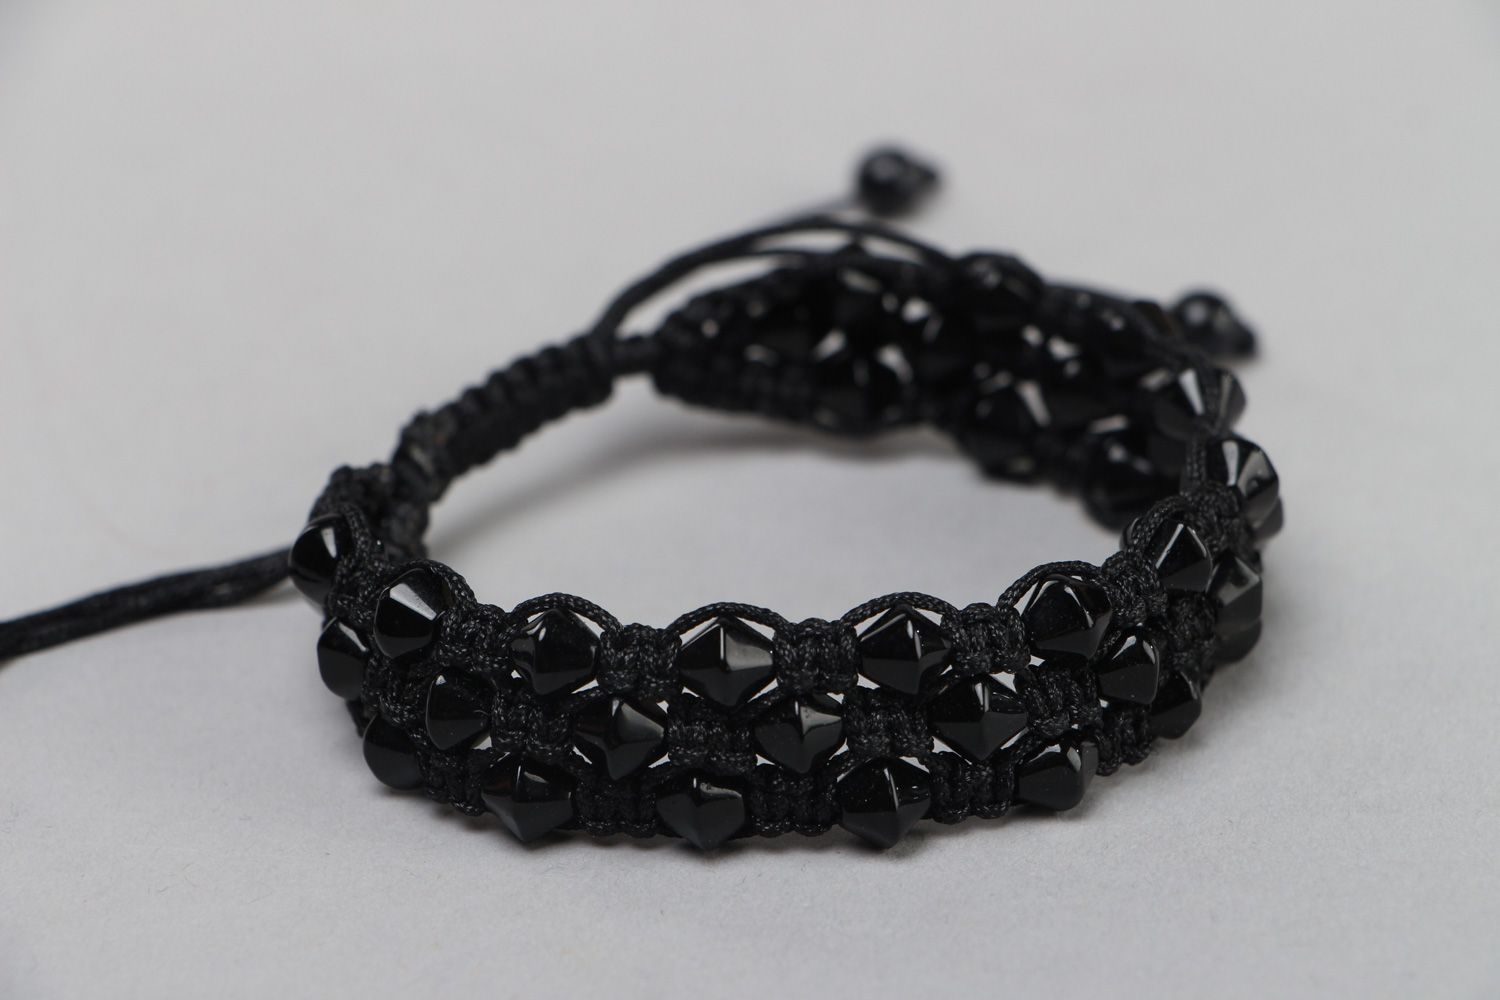 Handmade laconic friendship bracelet woven of black cord and beads for women photo 1